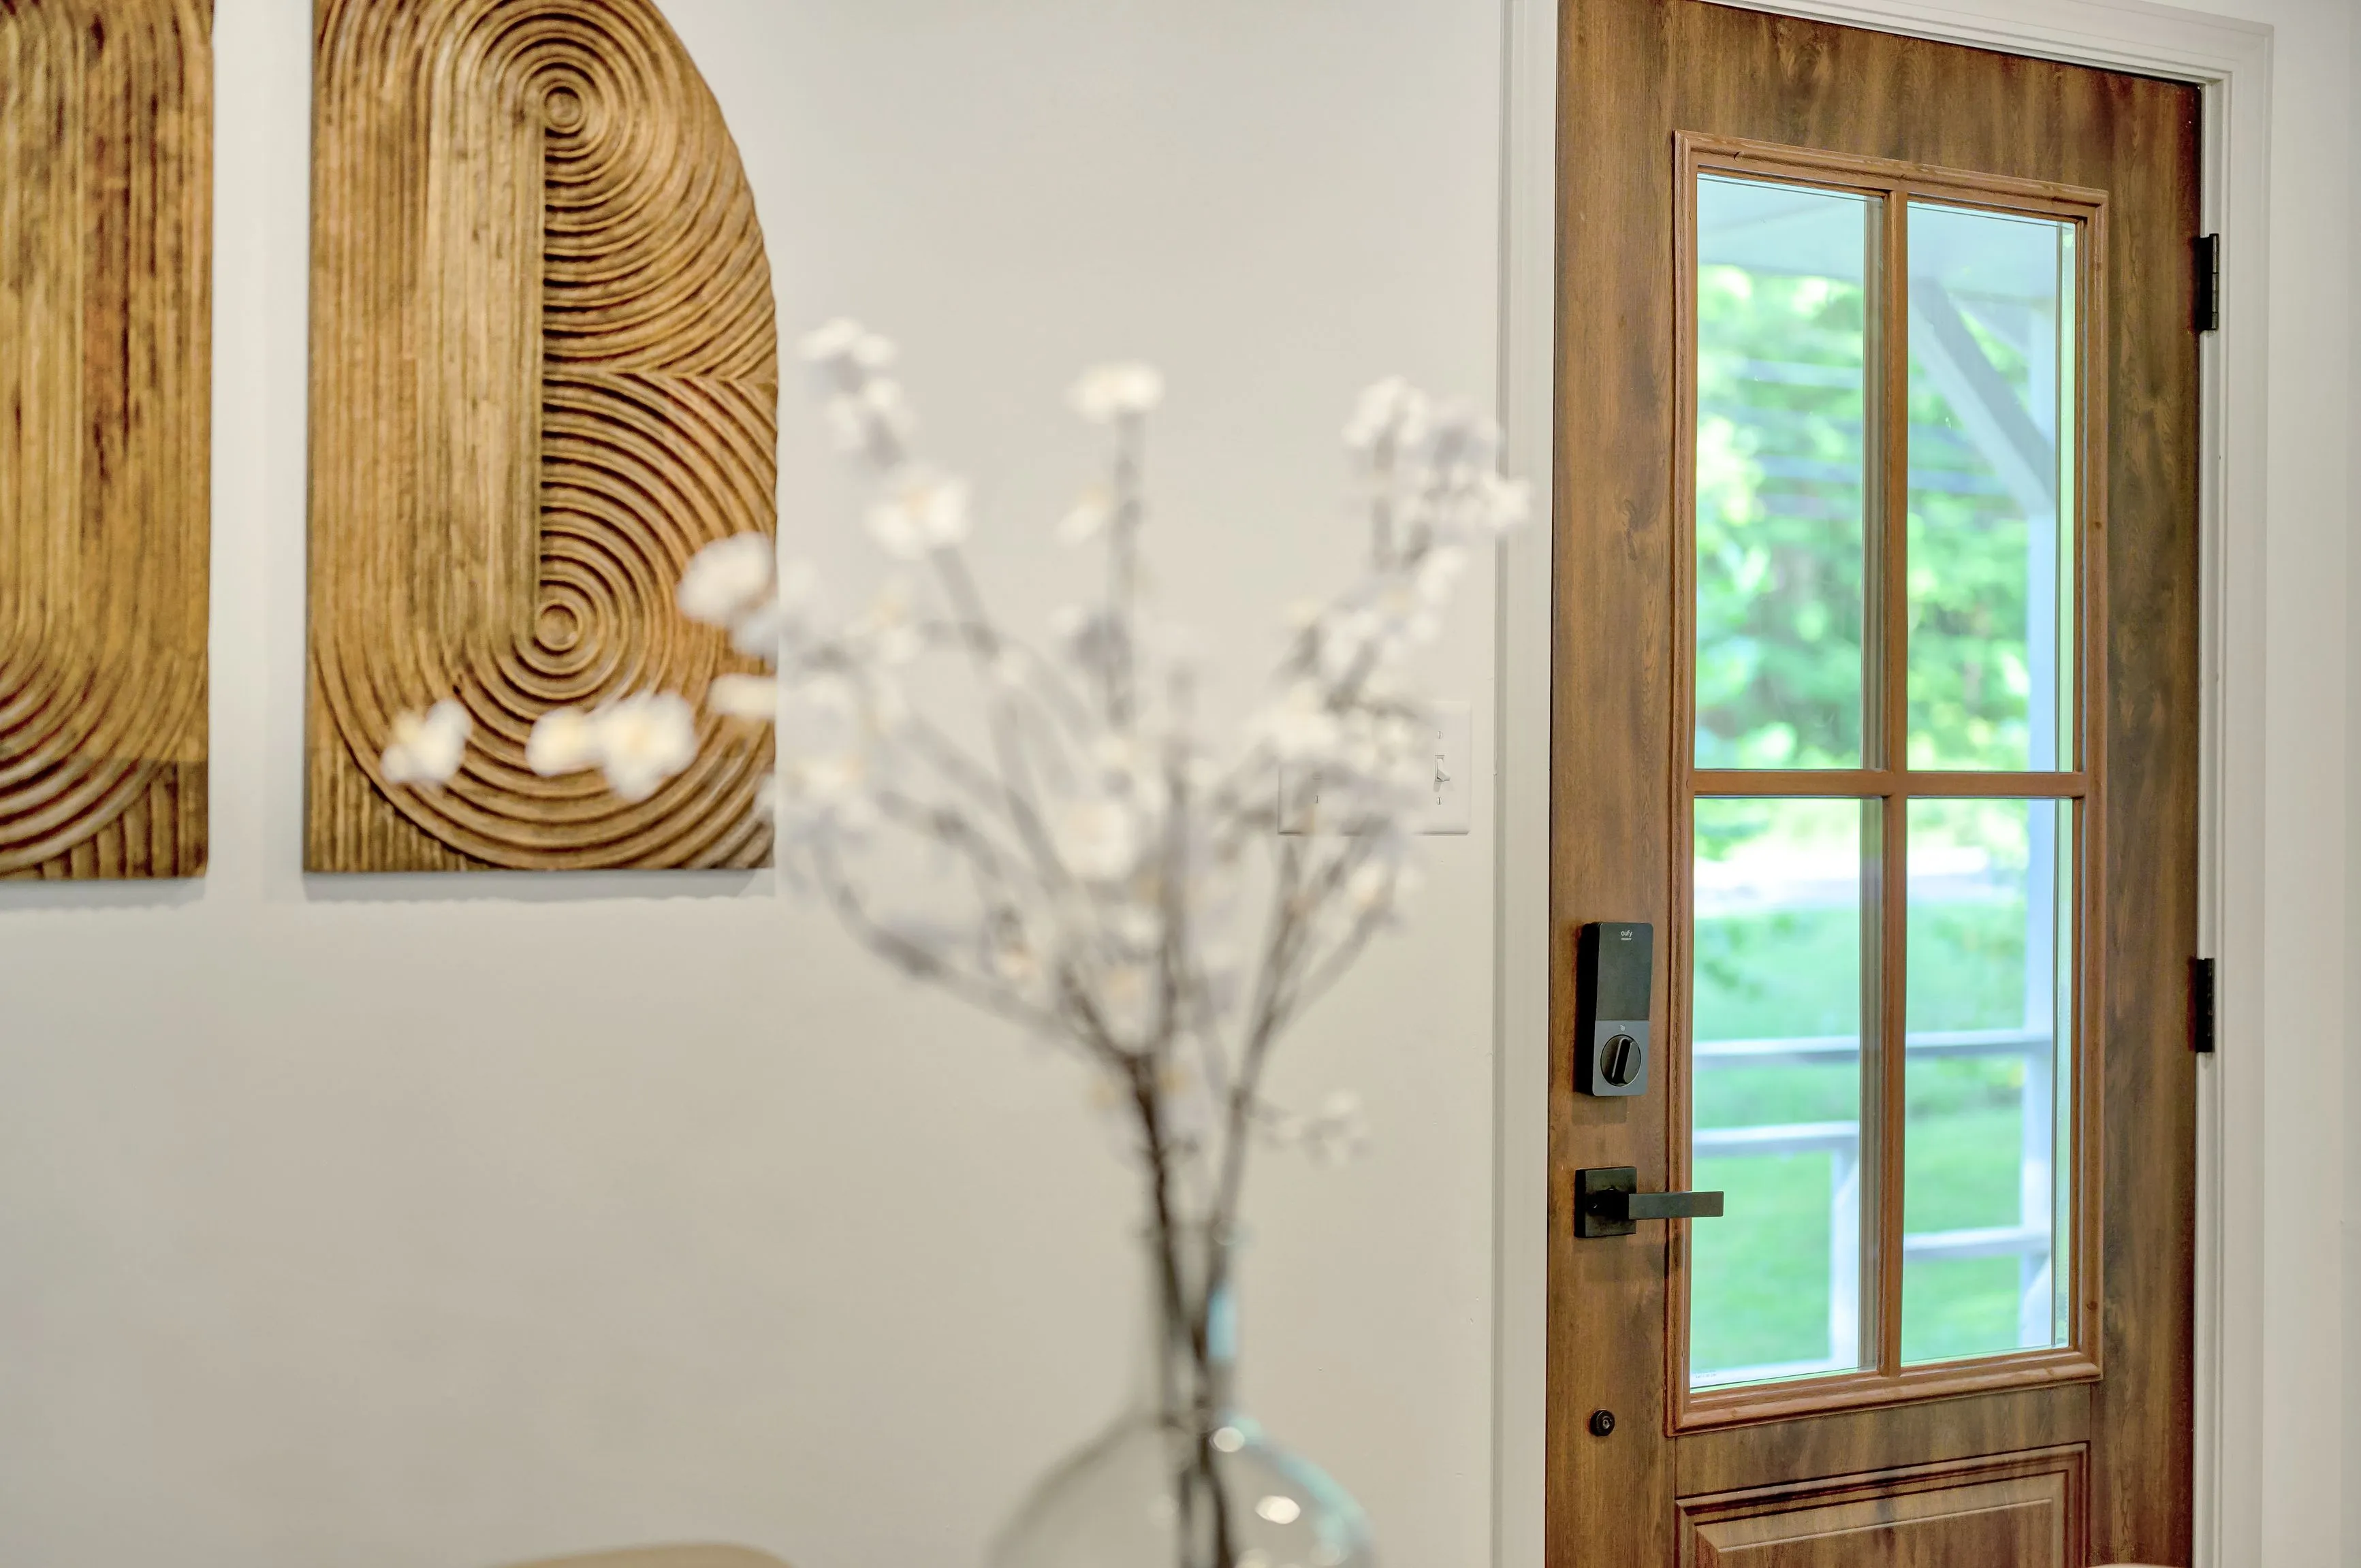 A modern interior hallway featuring a wooden door with glass panes, two abstract wooden wall art pieces, and a blurred foreground of a glass vase with white branches.